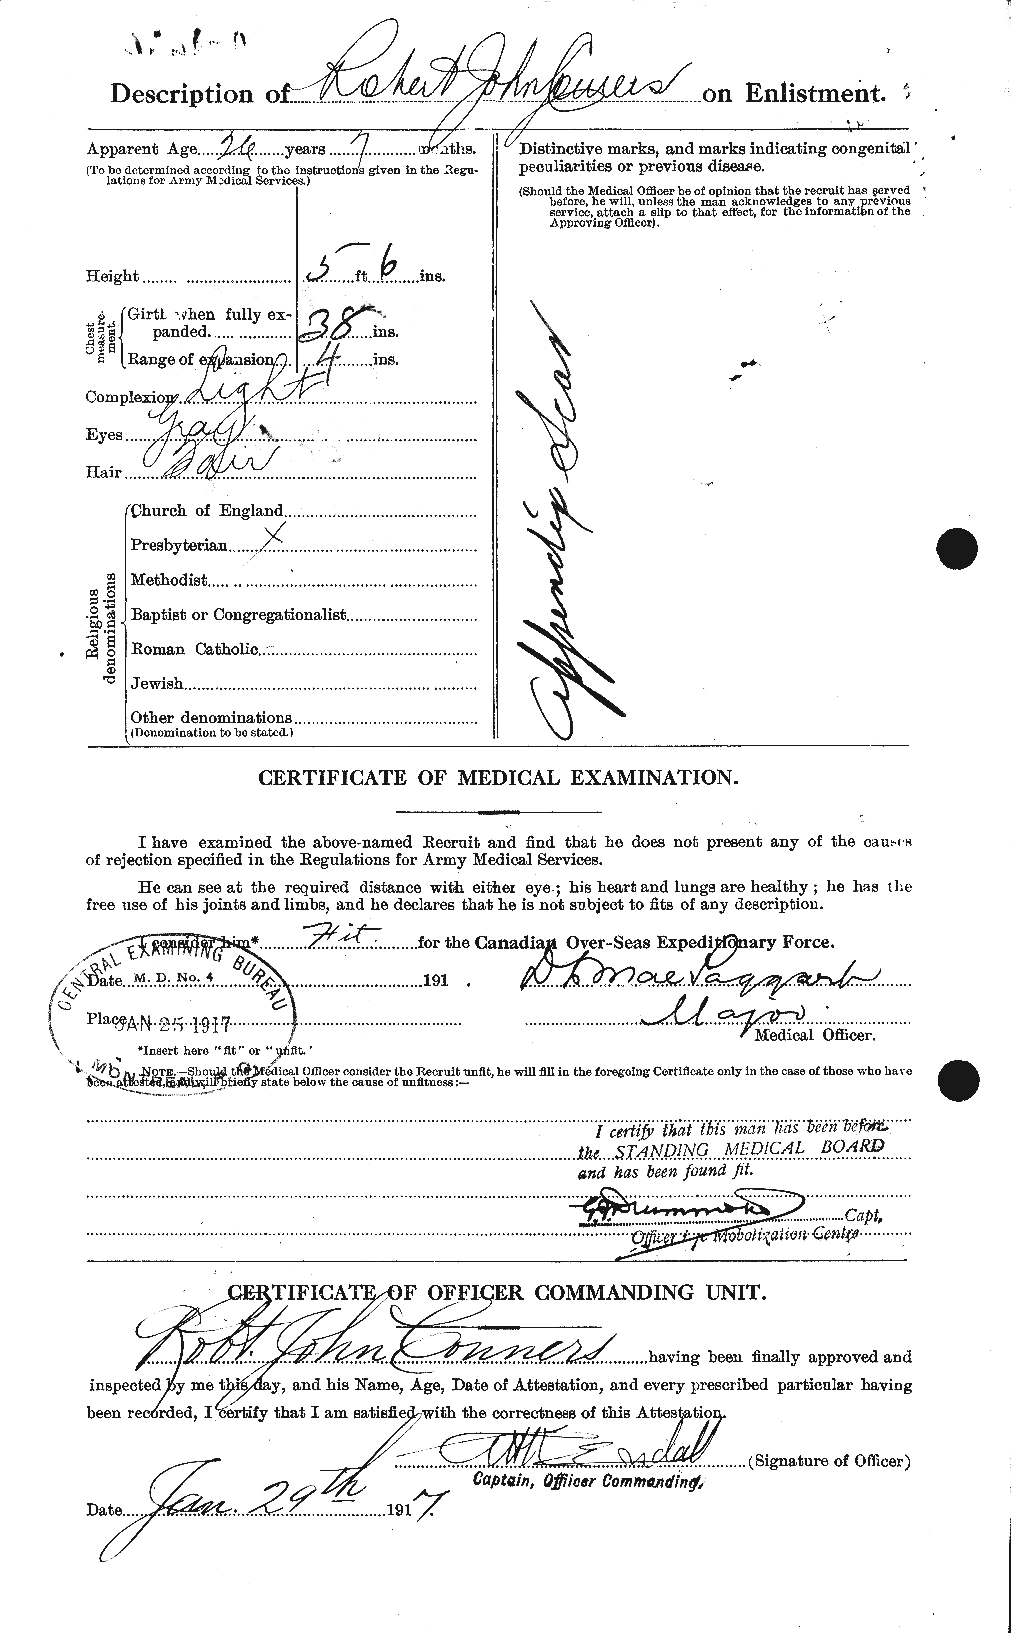 Personnel Records of the First World War - CEF 068924b